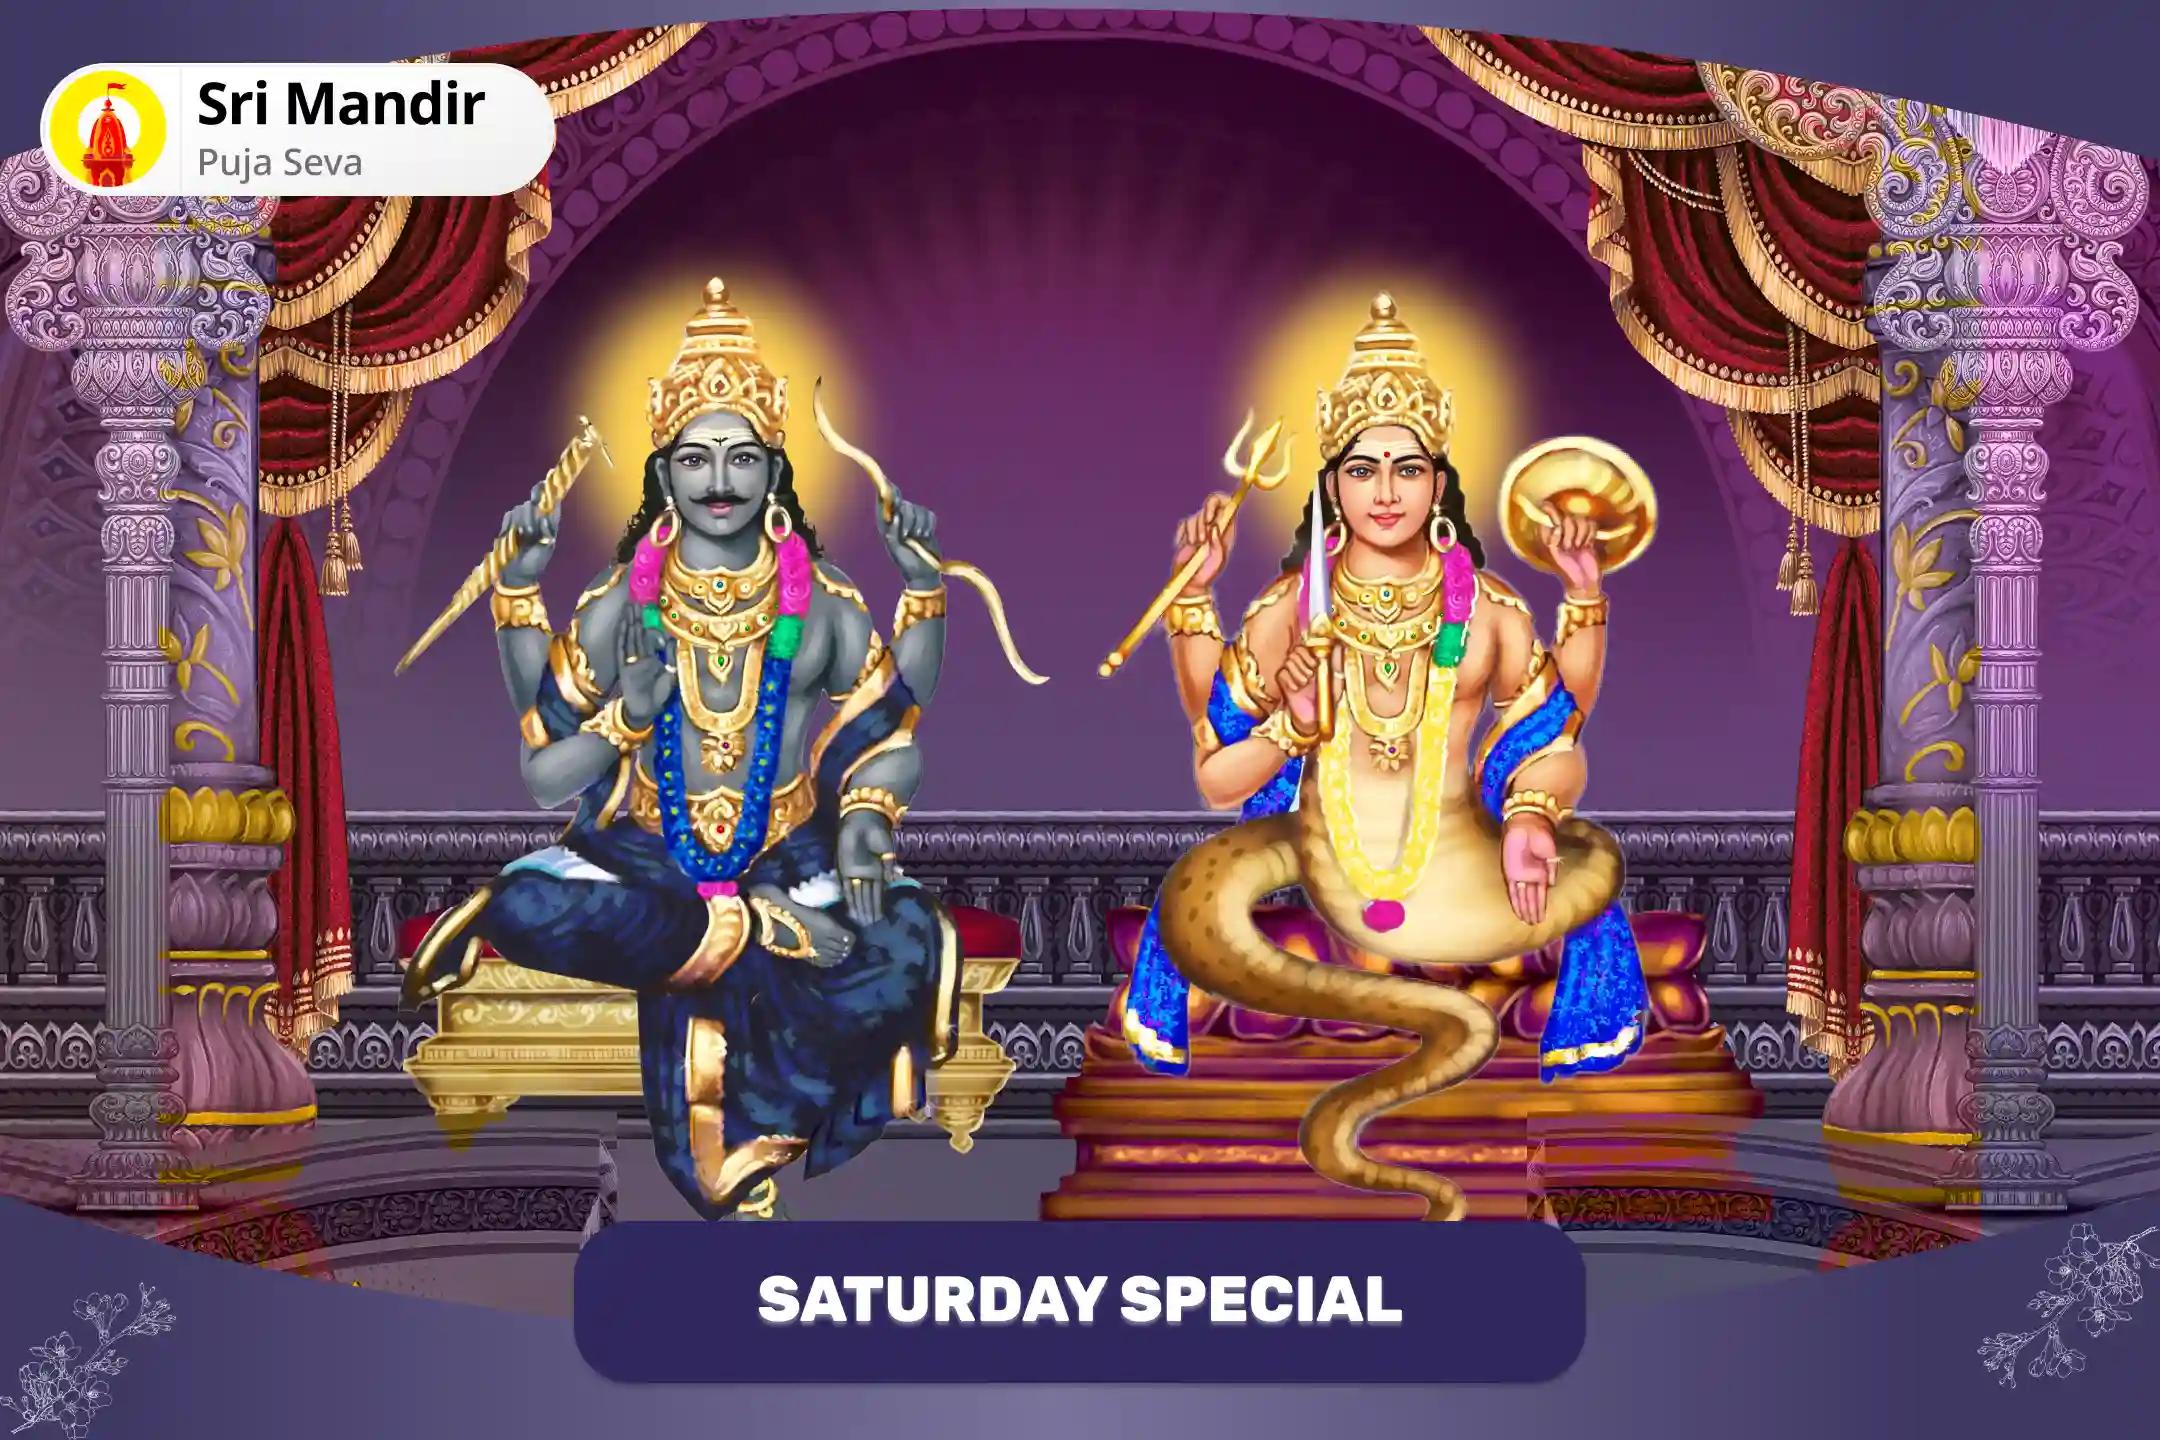 Saturday Special Rahu-Shani Shapit Dosh Shanti Yagya and Til Tel Abhishek for Protection from Obstacles and Delays